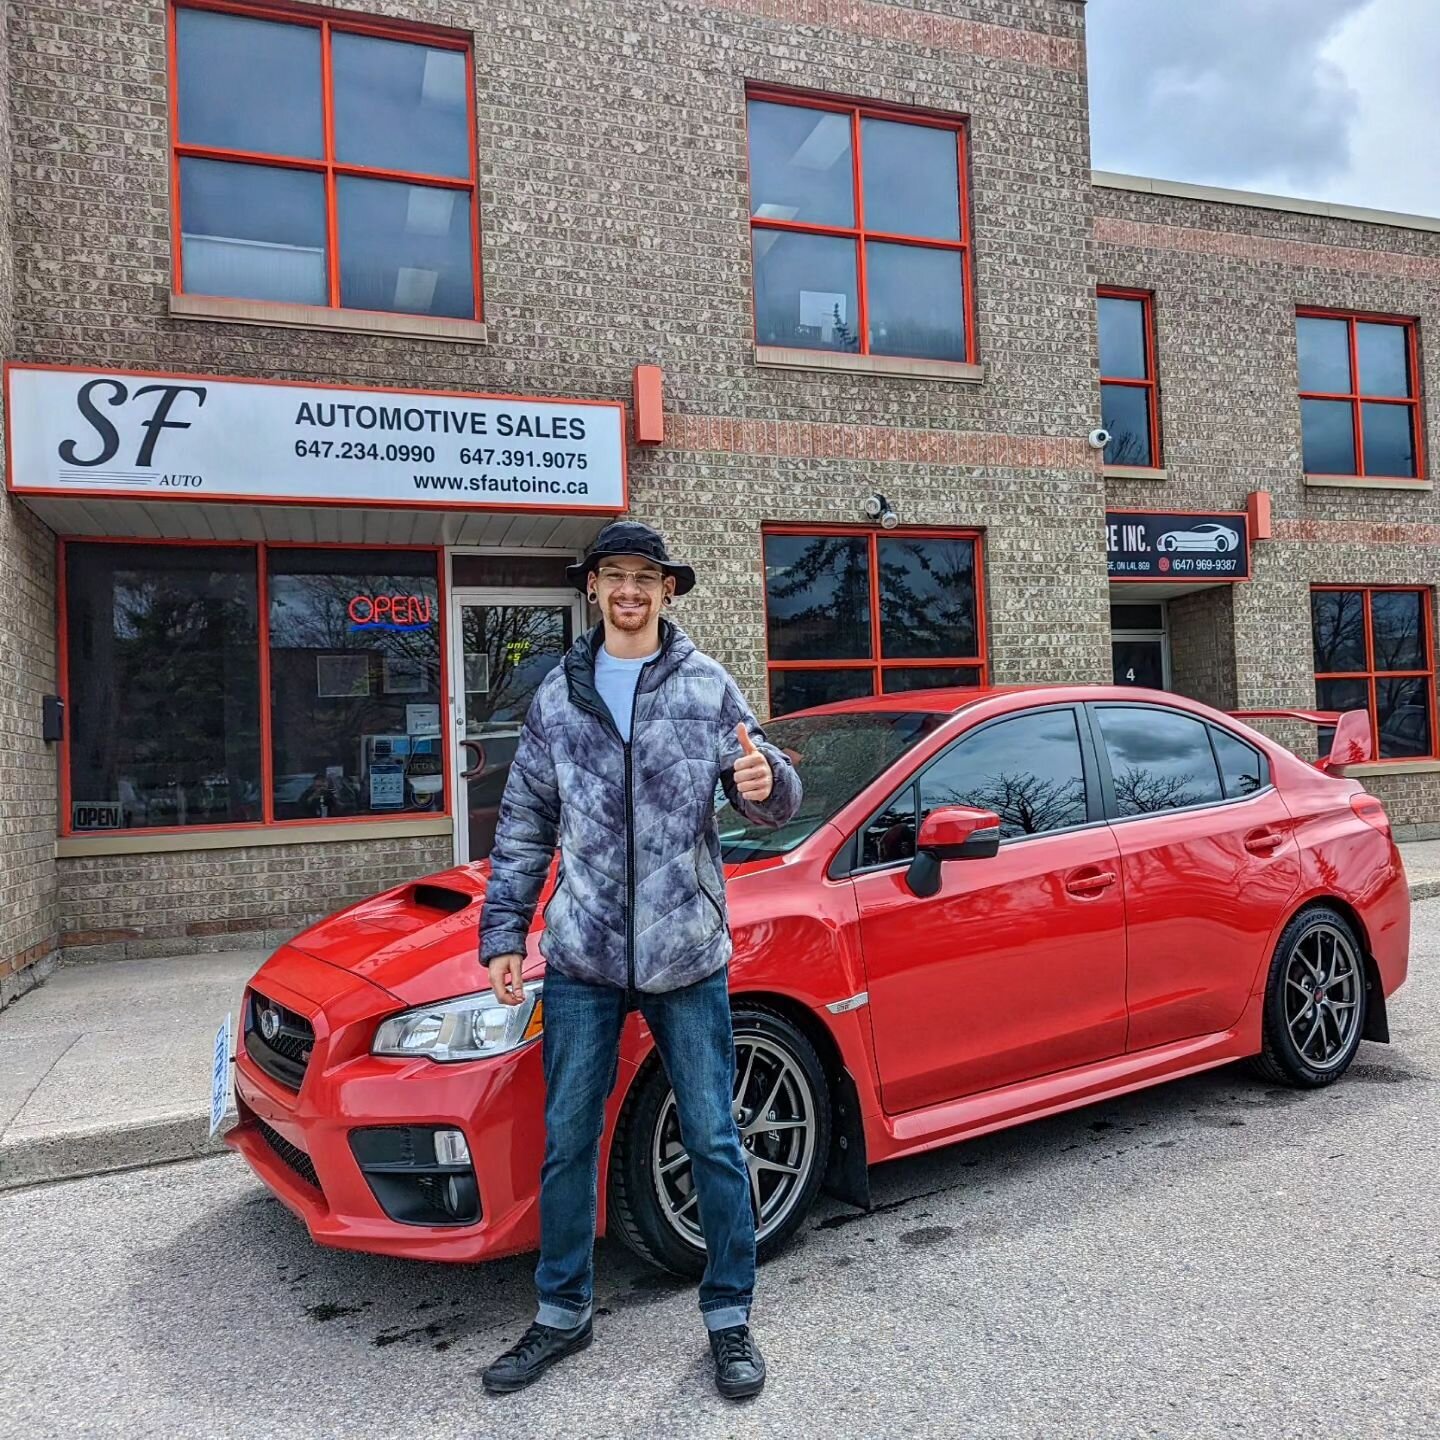 Congratulations Brandon on your new 17 Subaru STI 💪🏁 Thank you for trusting in SF Auto and welcome to our Family 🏁🏁
.
.
.
.
.
.
.

.
.
.
.
.
.
.
.
.
.
.
#sfauto #justdrive #subaru #sti #subie #subiegang #wrx #wrxstidaily #wrxnation #stination #st